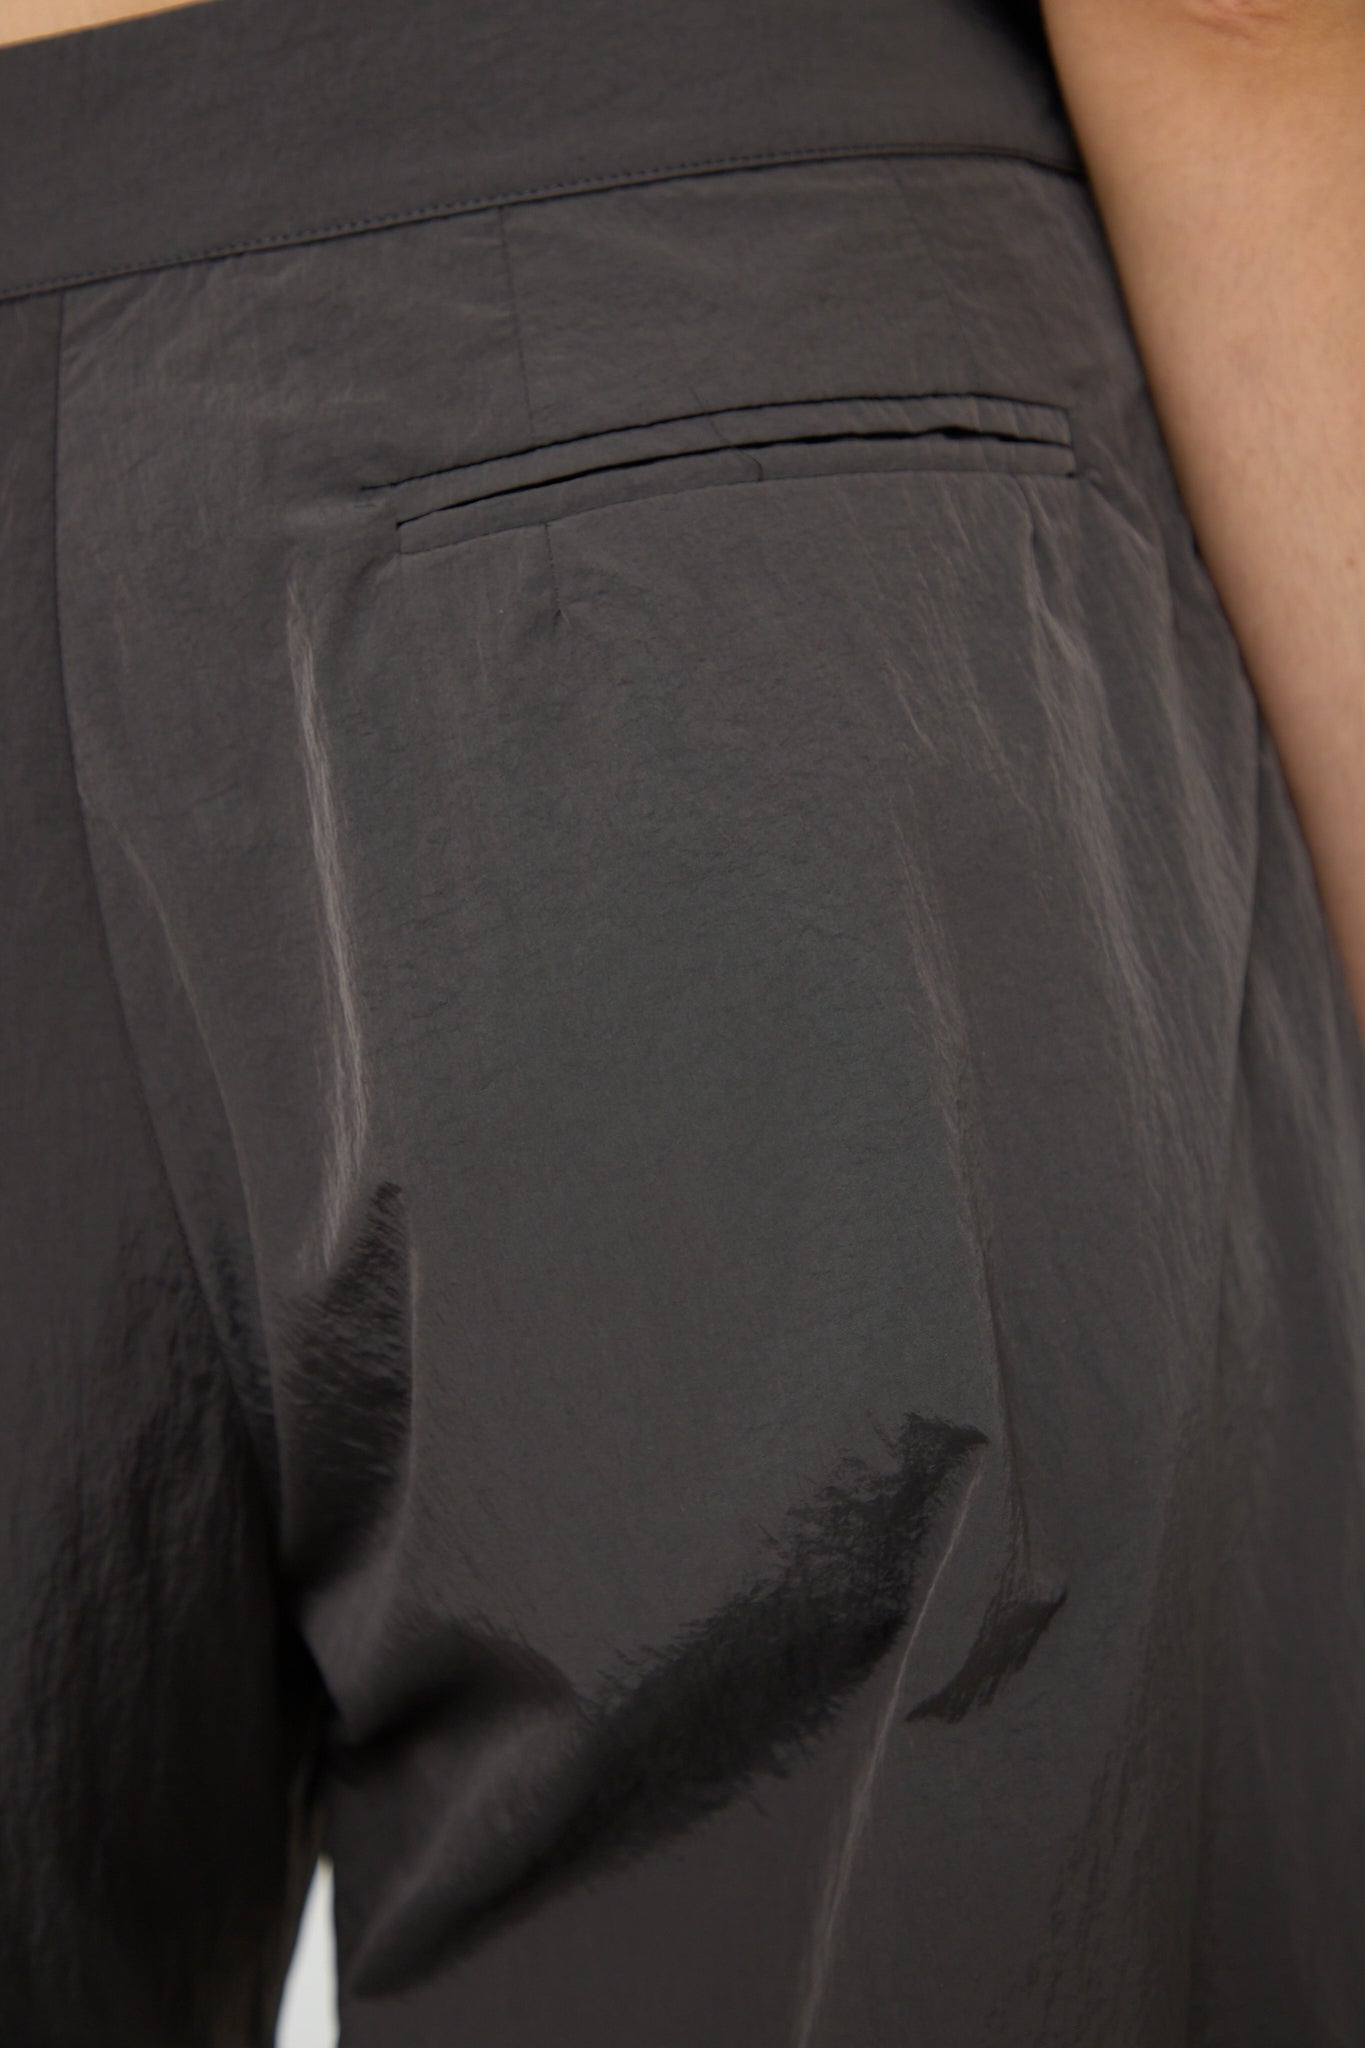 The back view of a woman's Mare Trouser in Deep Grey with Renata Brenha water repellent coating.